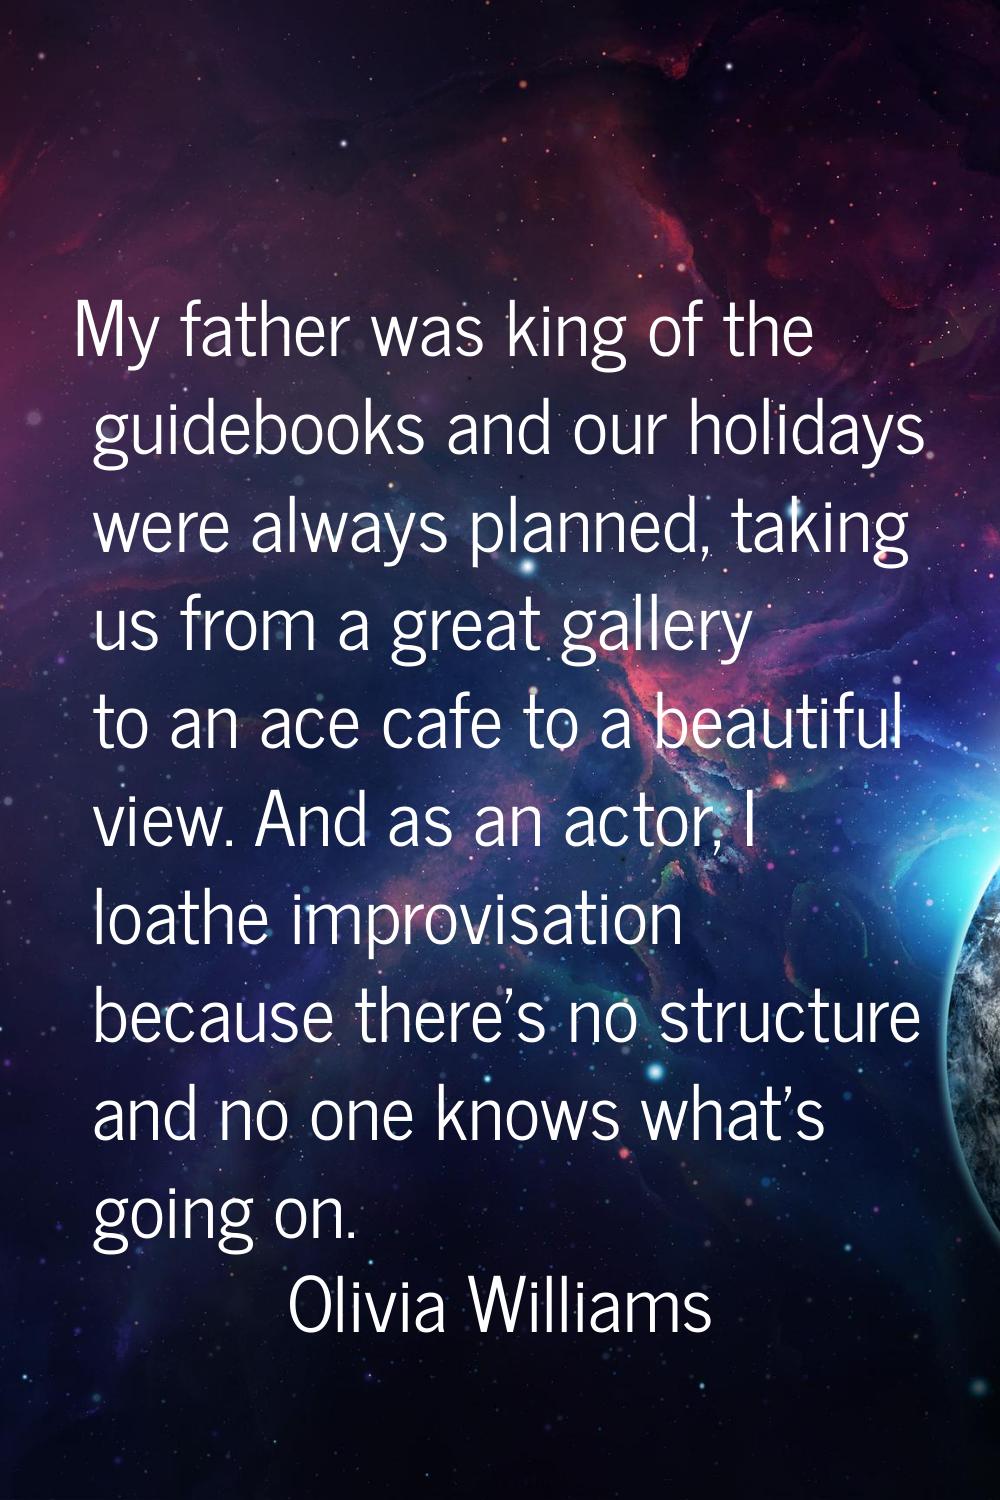 My father was king of the guidebooks and our holidays were always planned, taking us from a great g